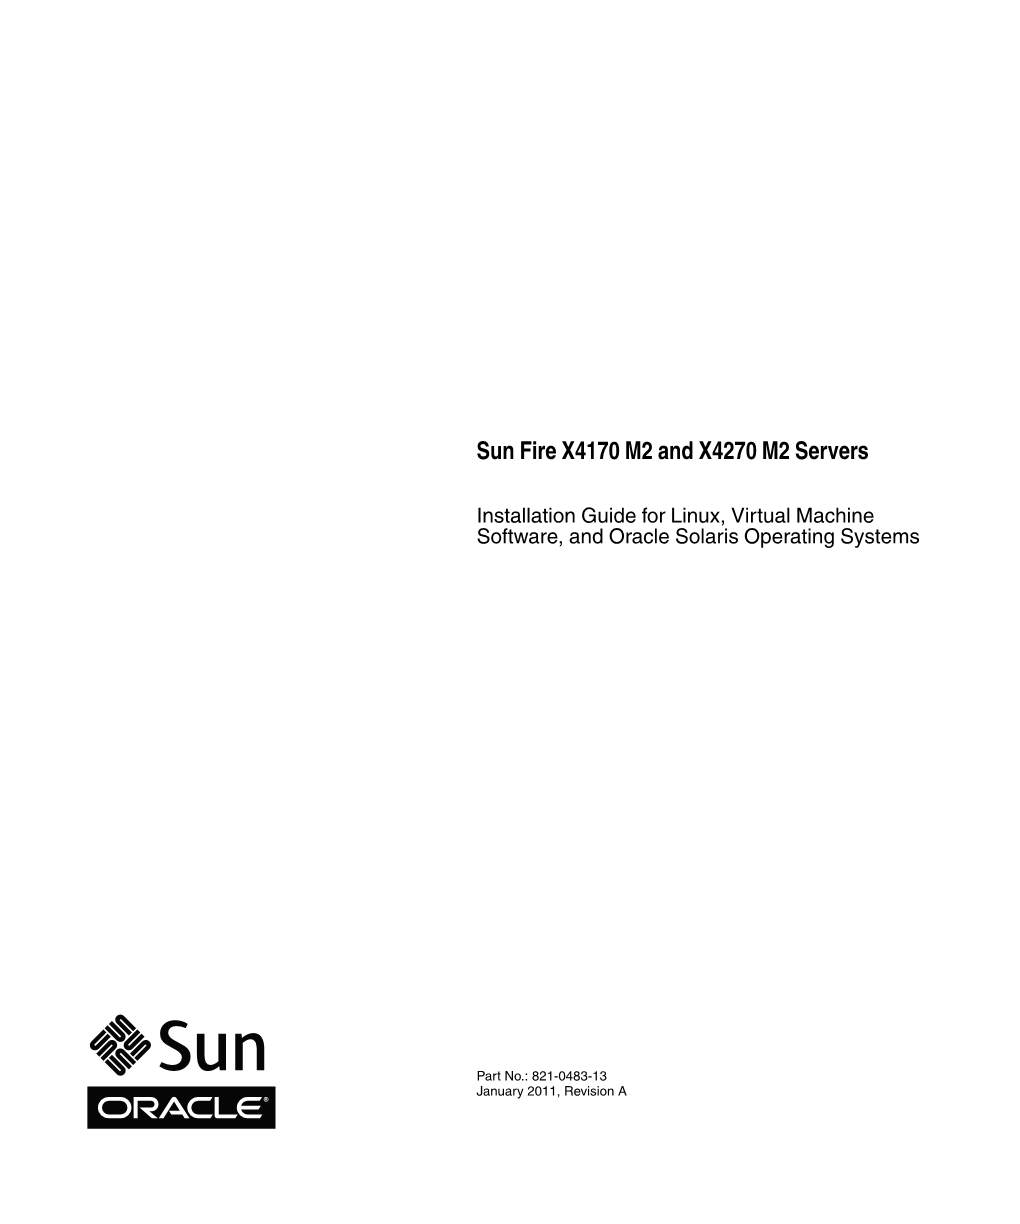 Sun Fire X4170 M2 and X4270 M2 Servers Installation Guide for Linux, Virtual Machine Software, and Oracle Solaris Operating Syst